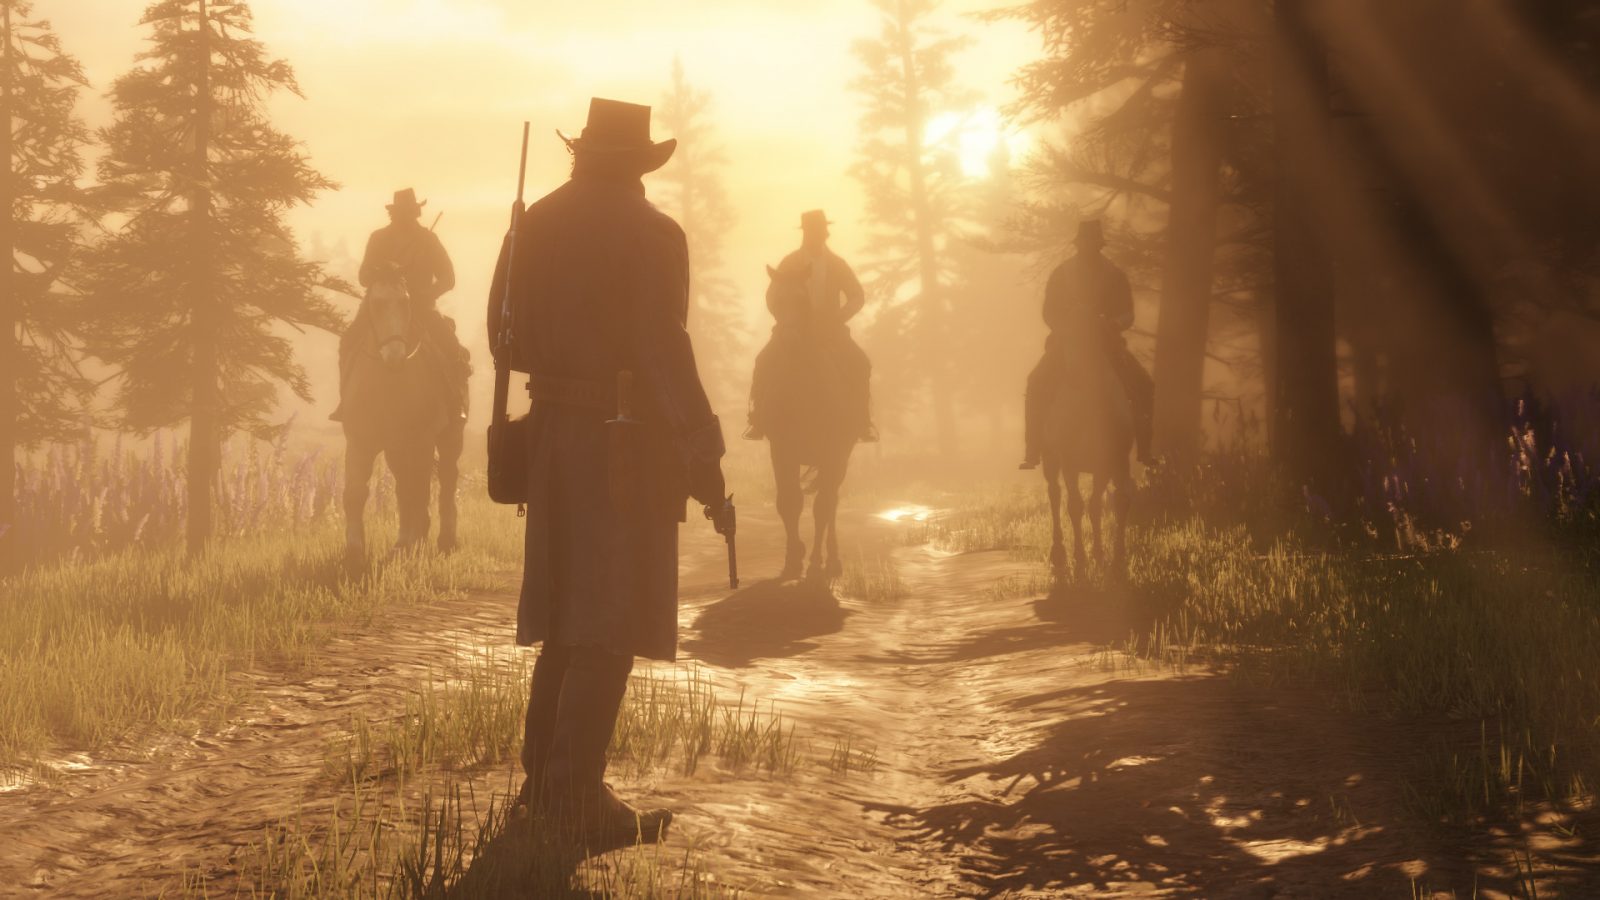 Red Dead Redemption 2 For PC Now Available to Pre-Purchase via the